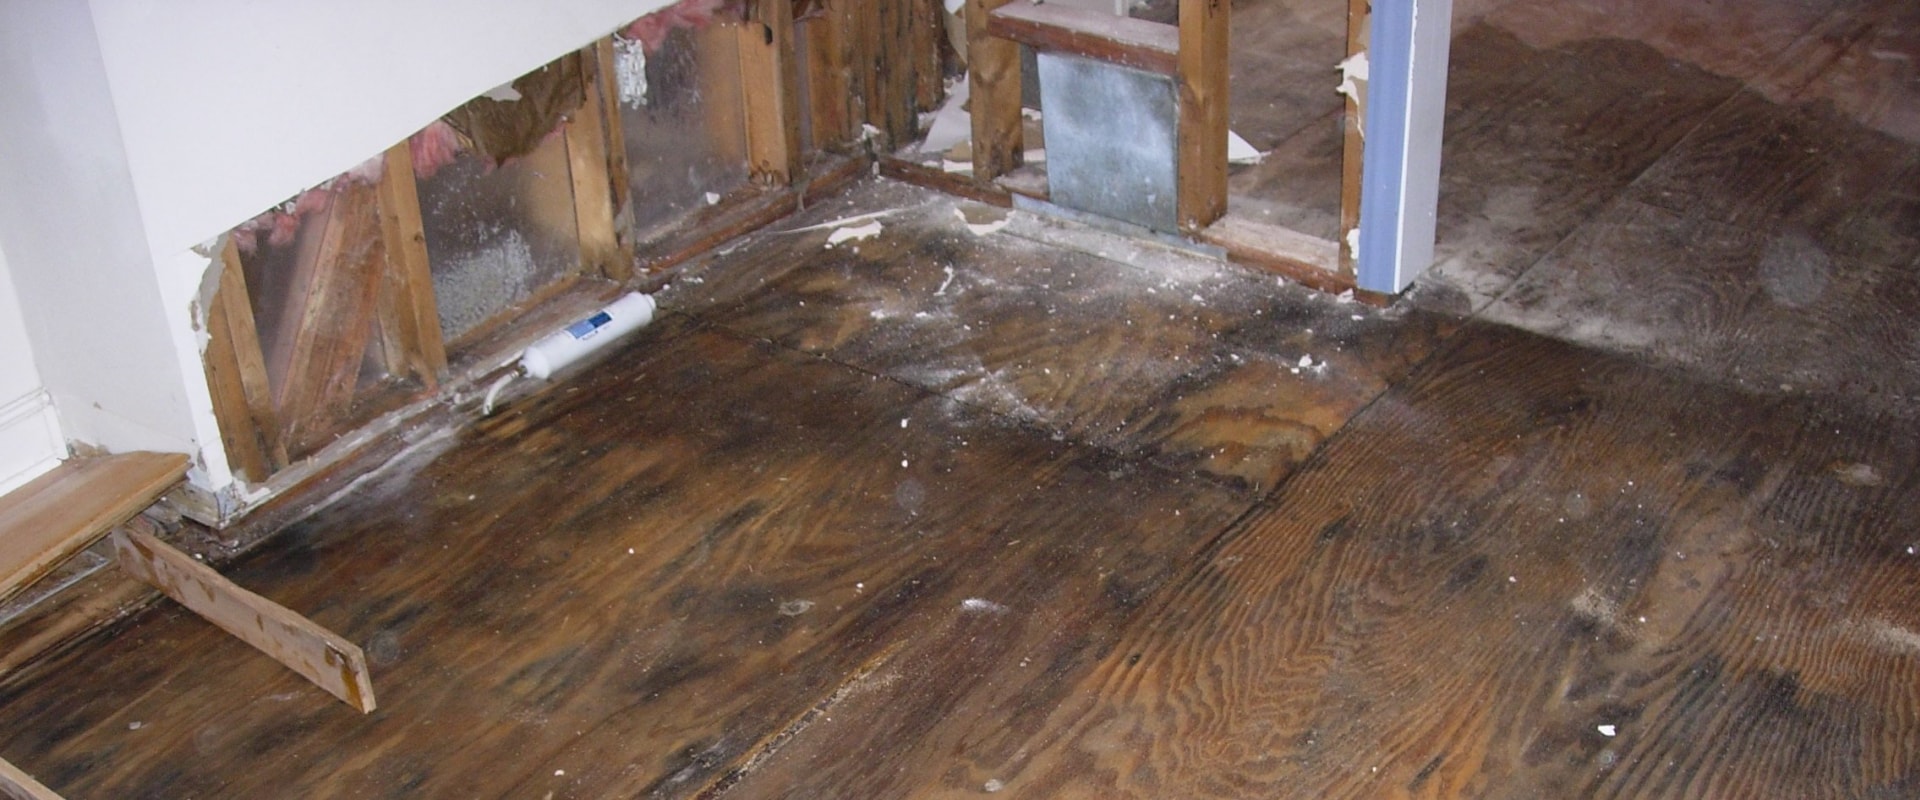 Can water damage show up later?